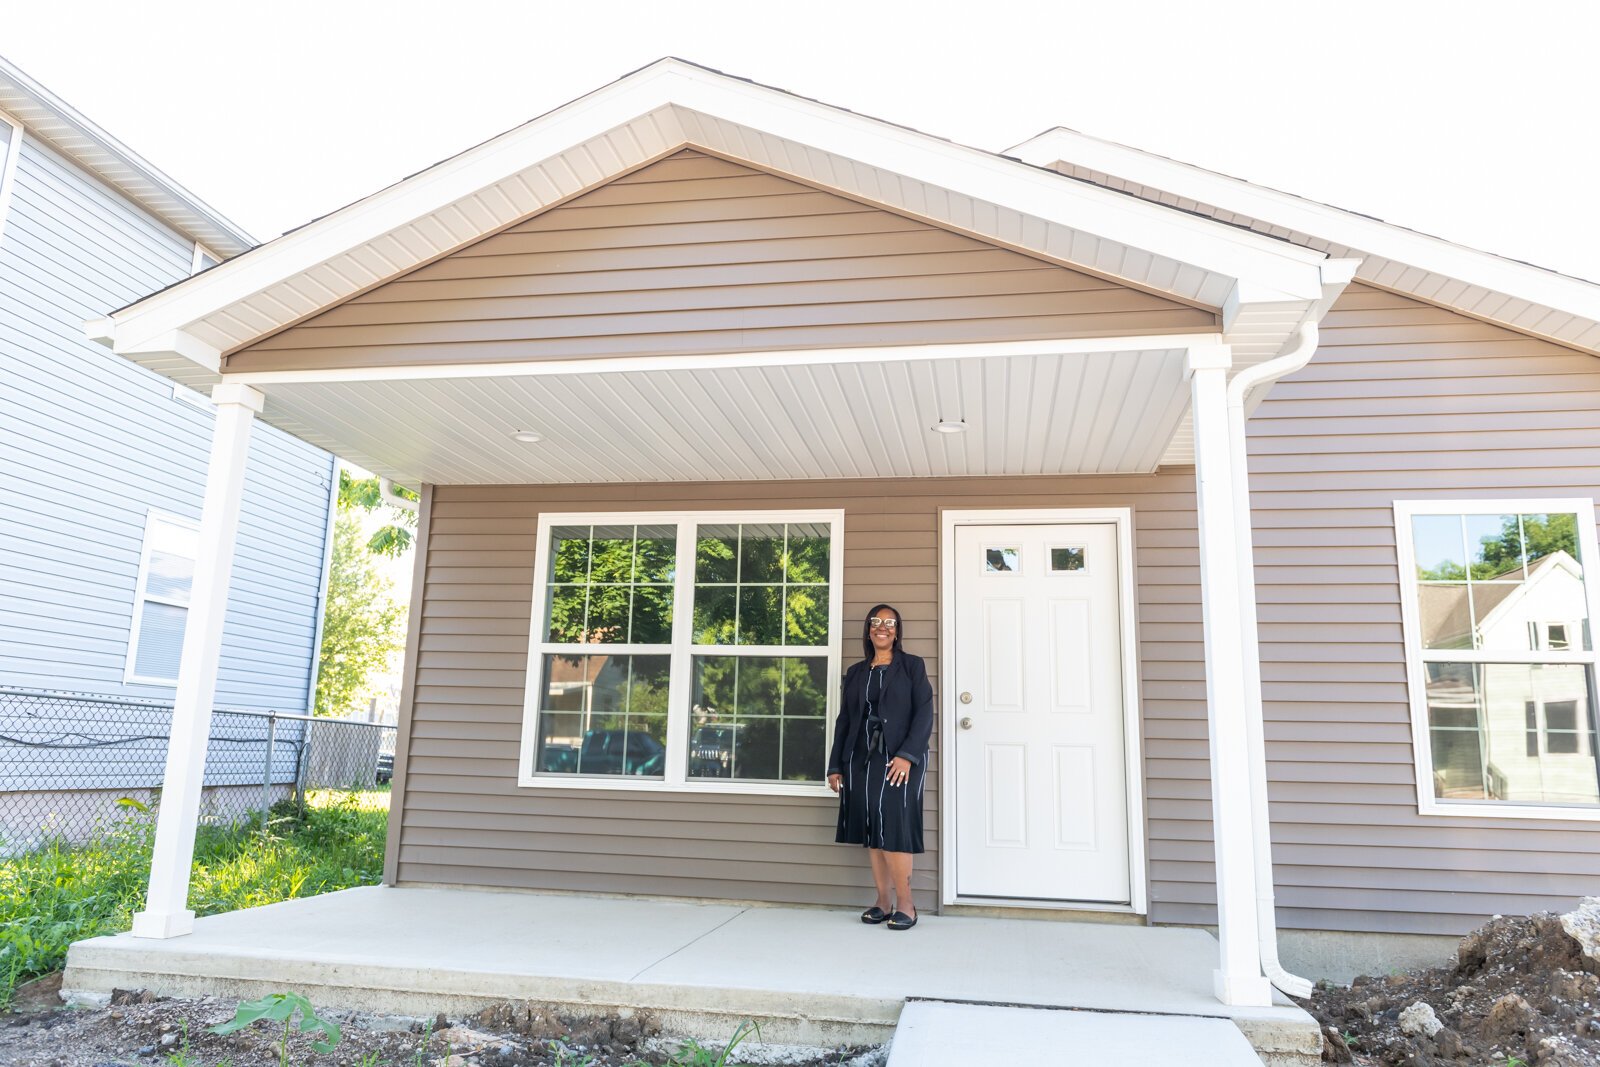 Sharon Tucker, Executive Director of Vincent Village, shows off the newest built family house in the village on July 19, 2022.